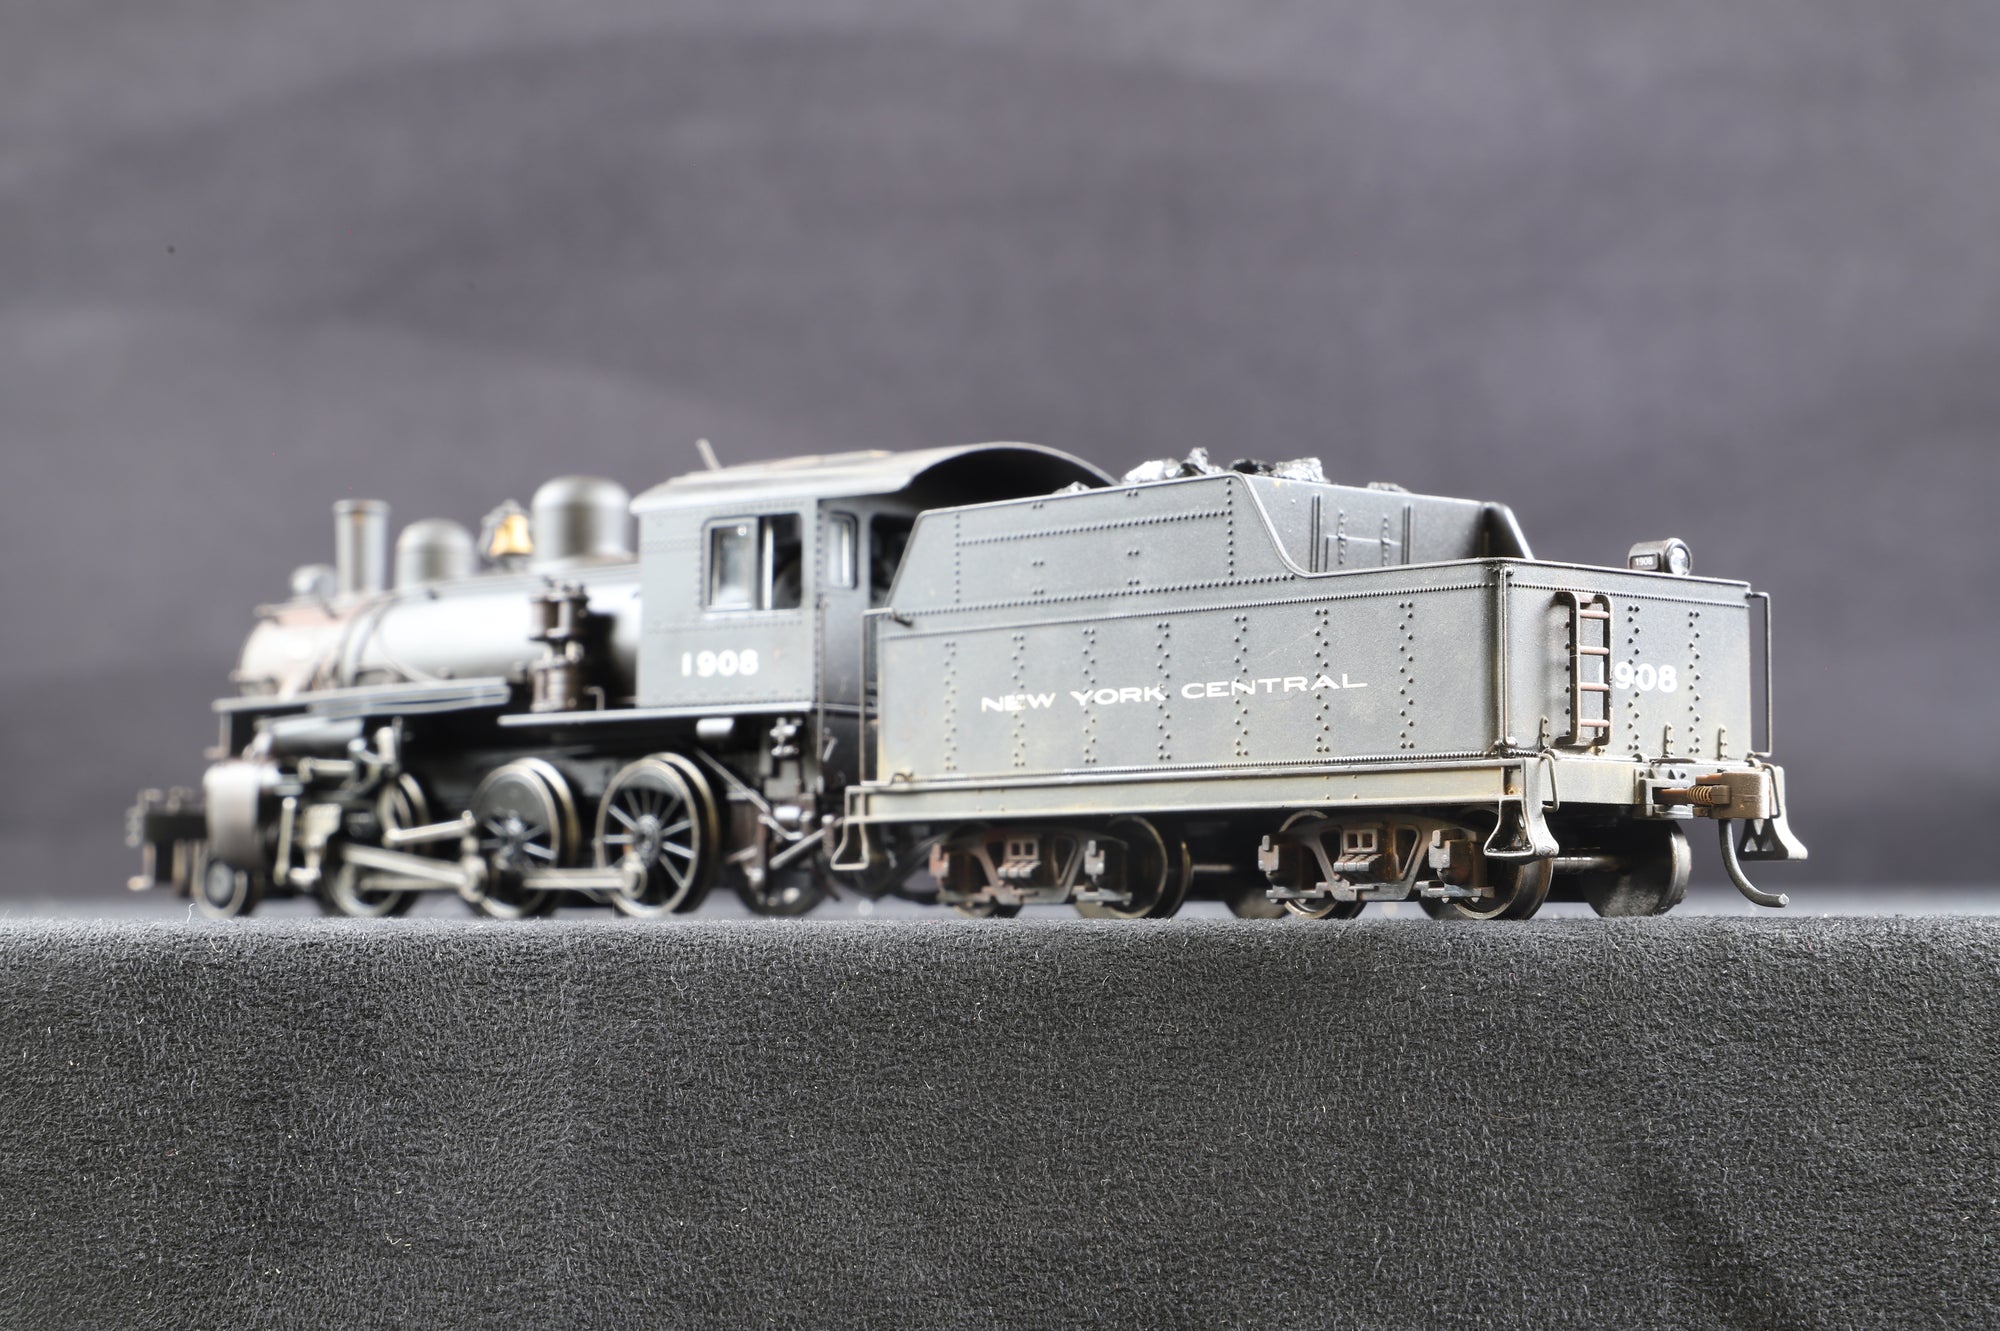 Bachmann HO 2-6-0 New York Central '1908', Weathered & DCC Sound